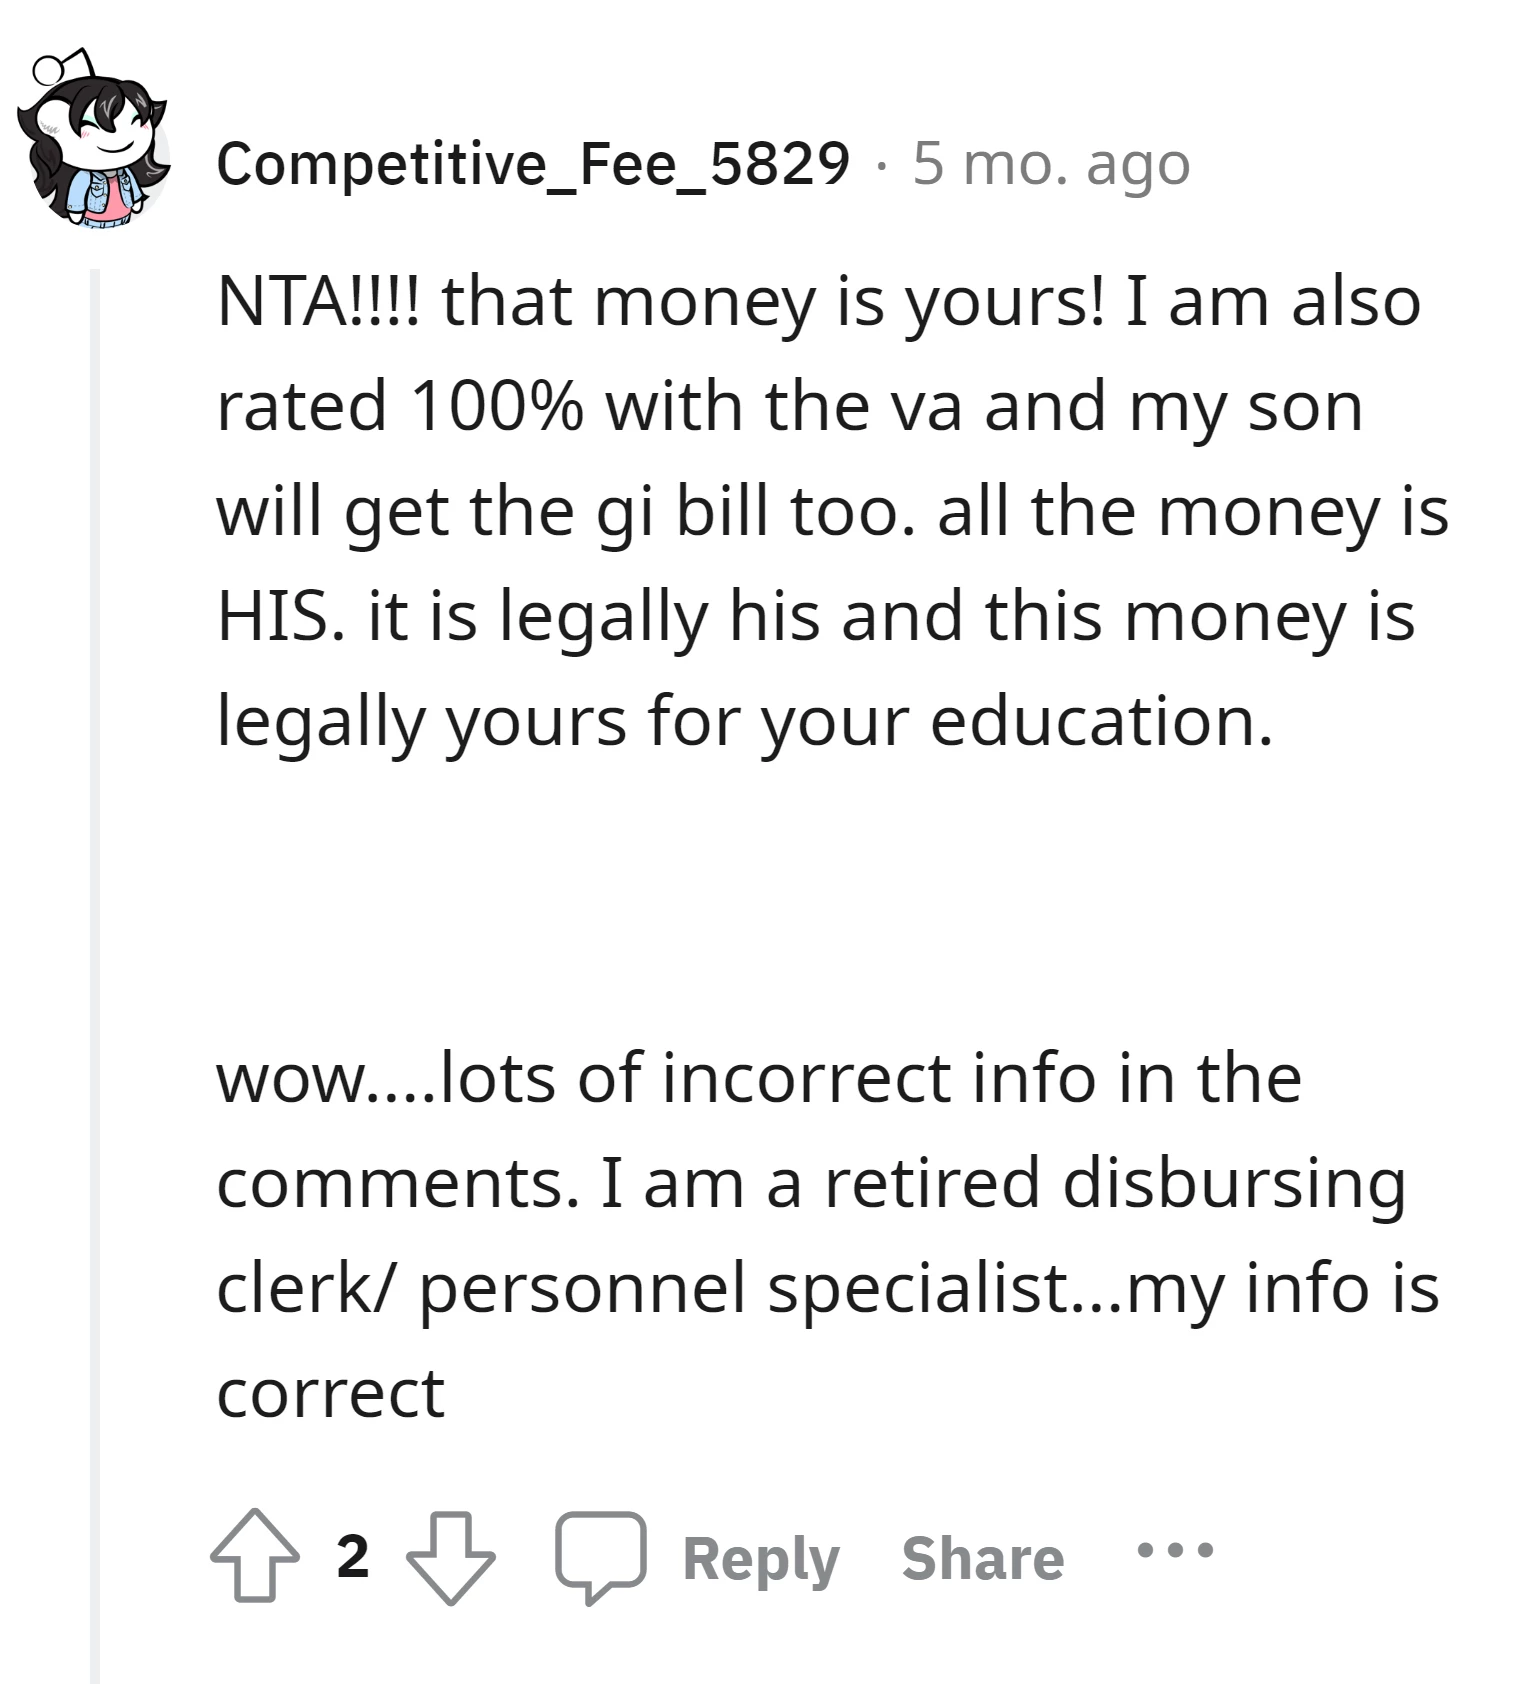 The money is legally OP's for her education